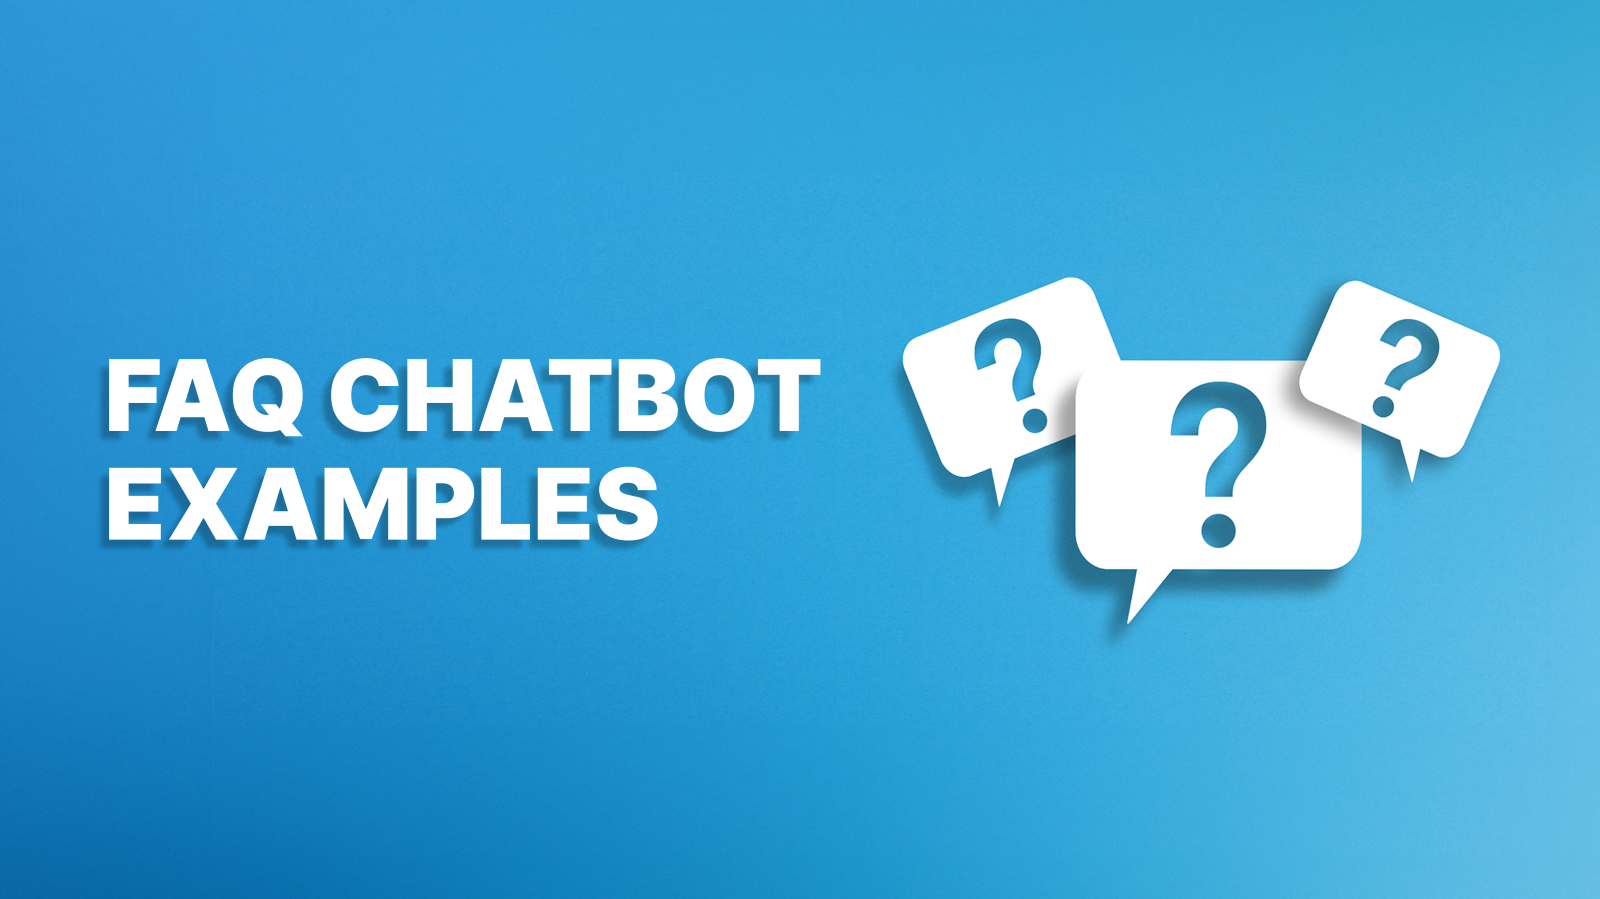 FAQ Chatbot Examples: The Way to Effective Customer Service